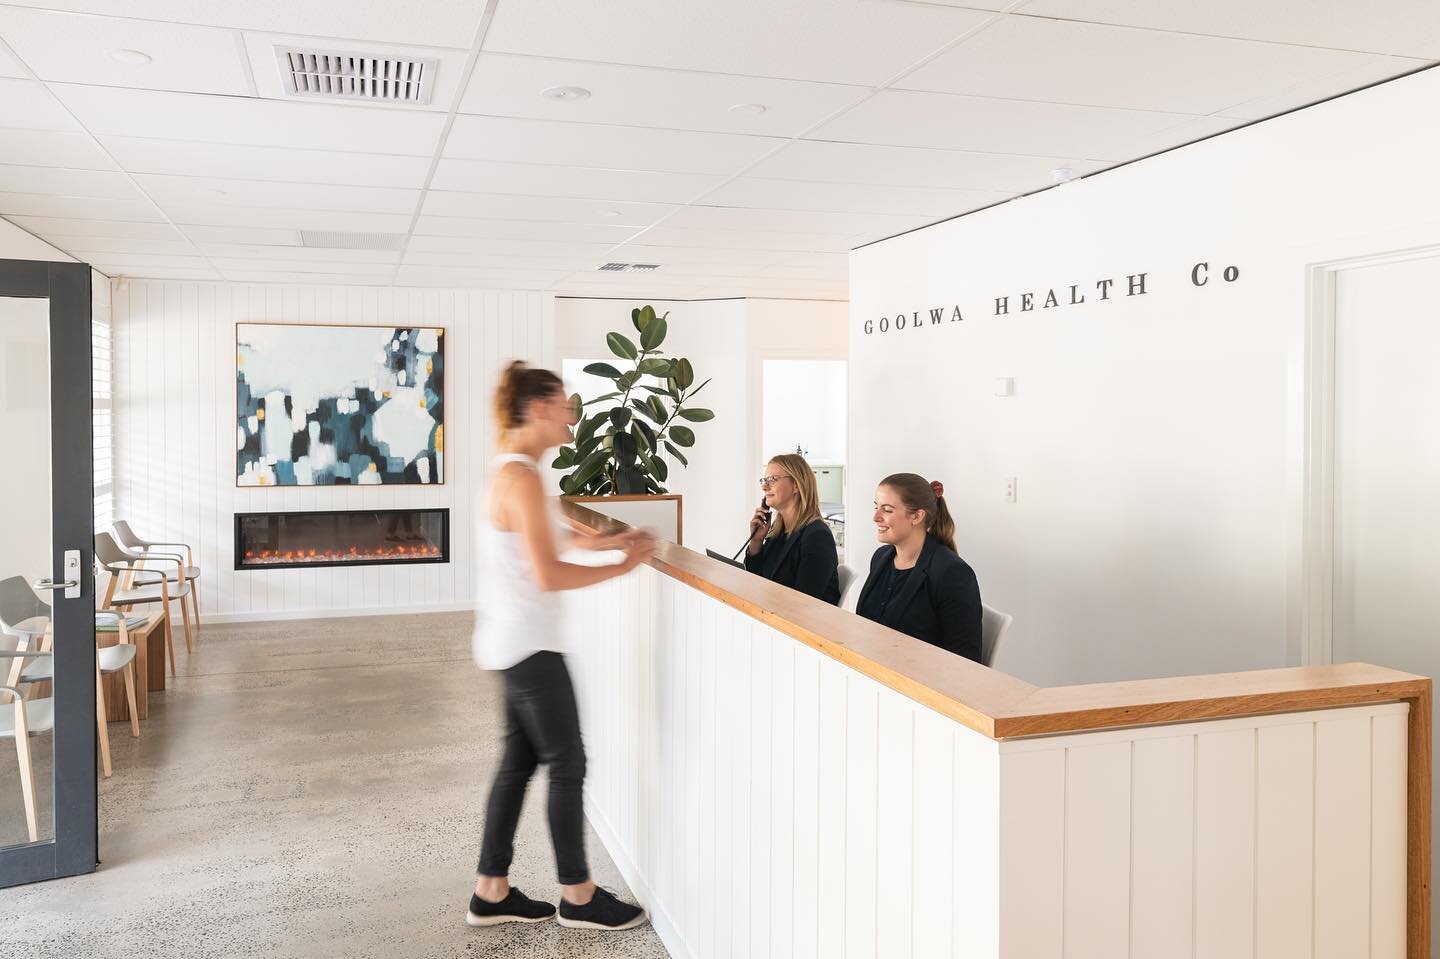 At Goolwa OT we often come to visit you in your home however we can also see you in our spacious and vibrant clinic located @goolwahealthco.

If have any questions out lovely fount if house staff can help guide you in the right direction! 

Call or p